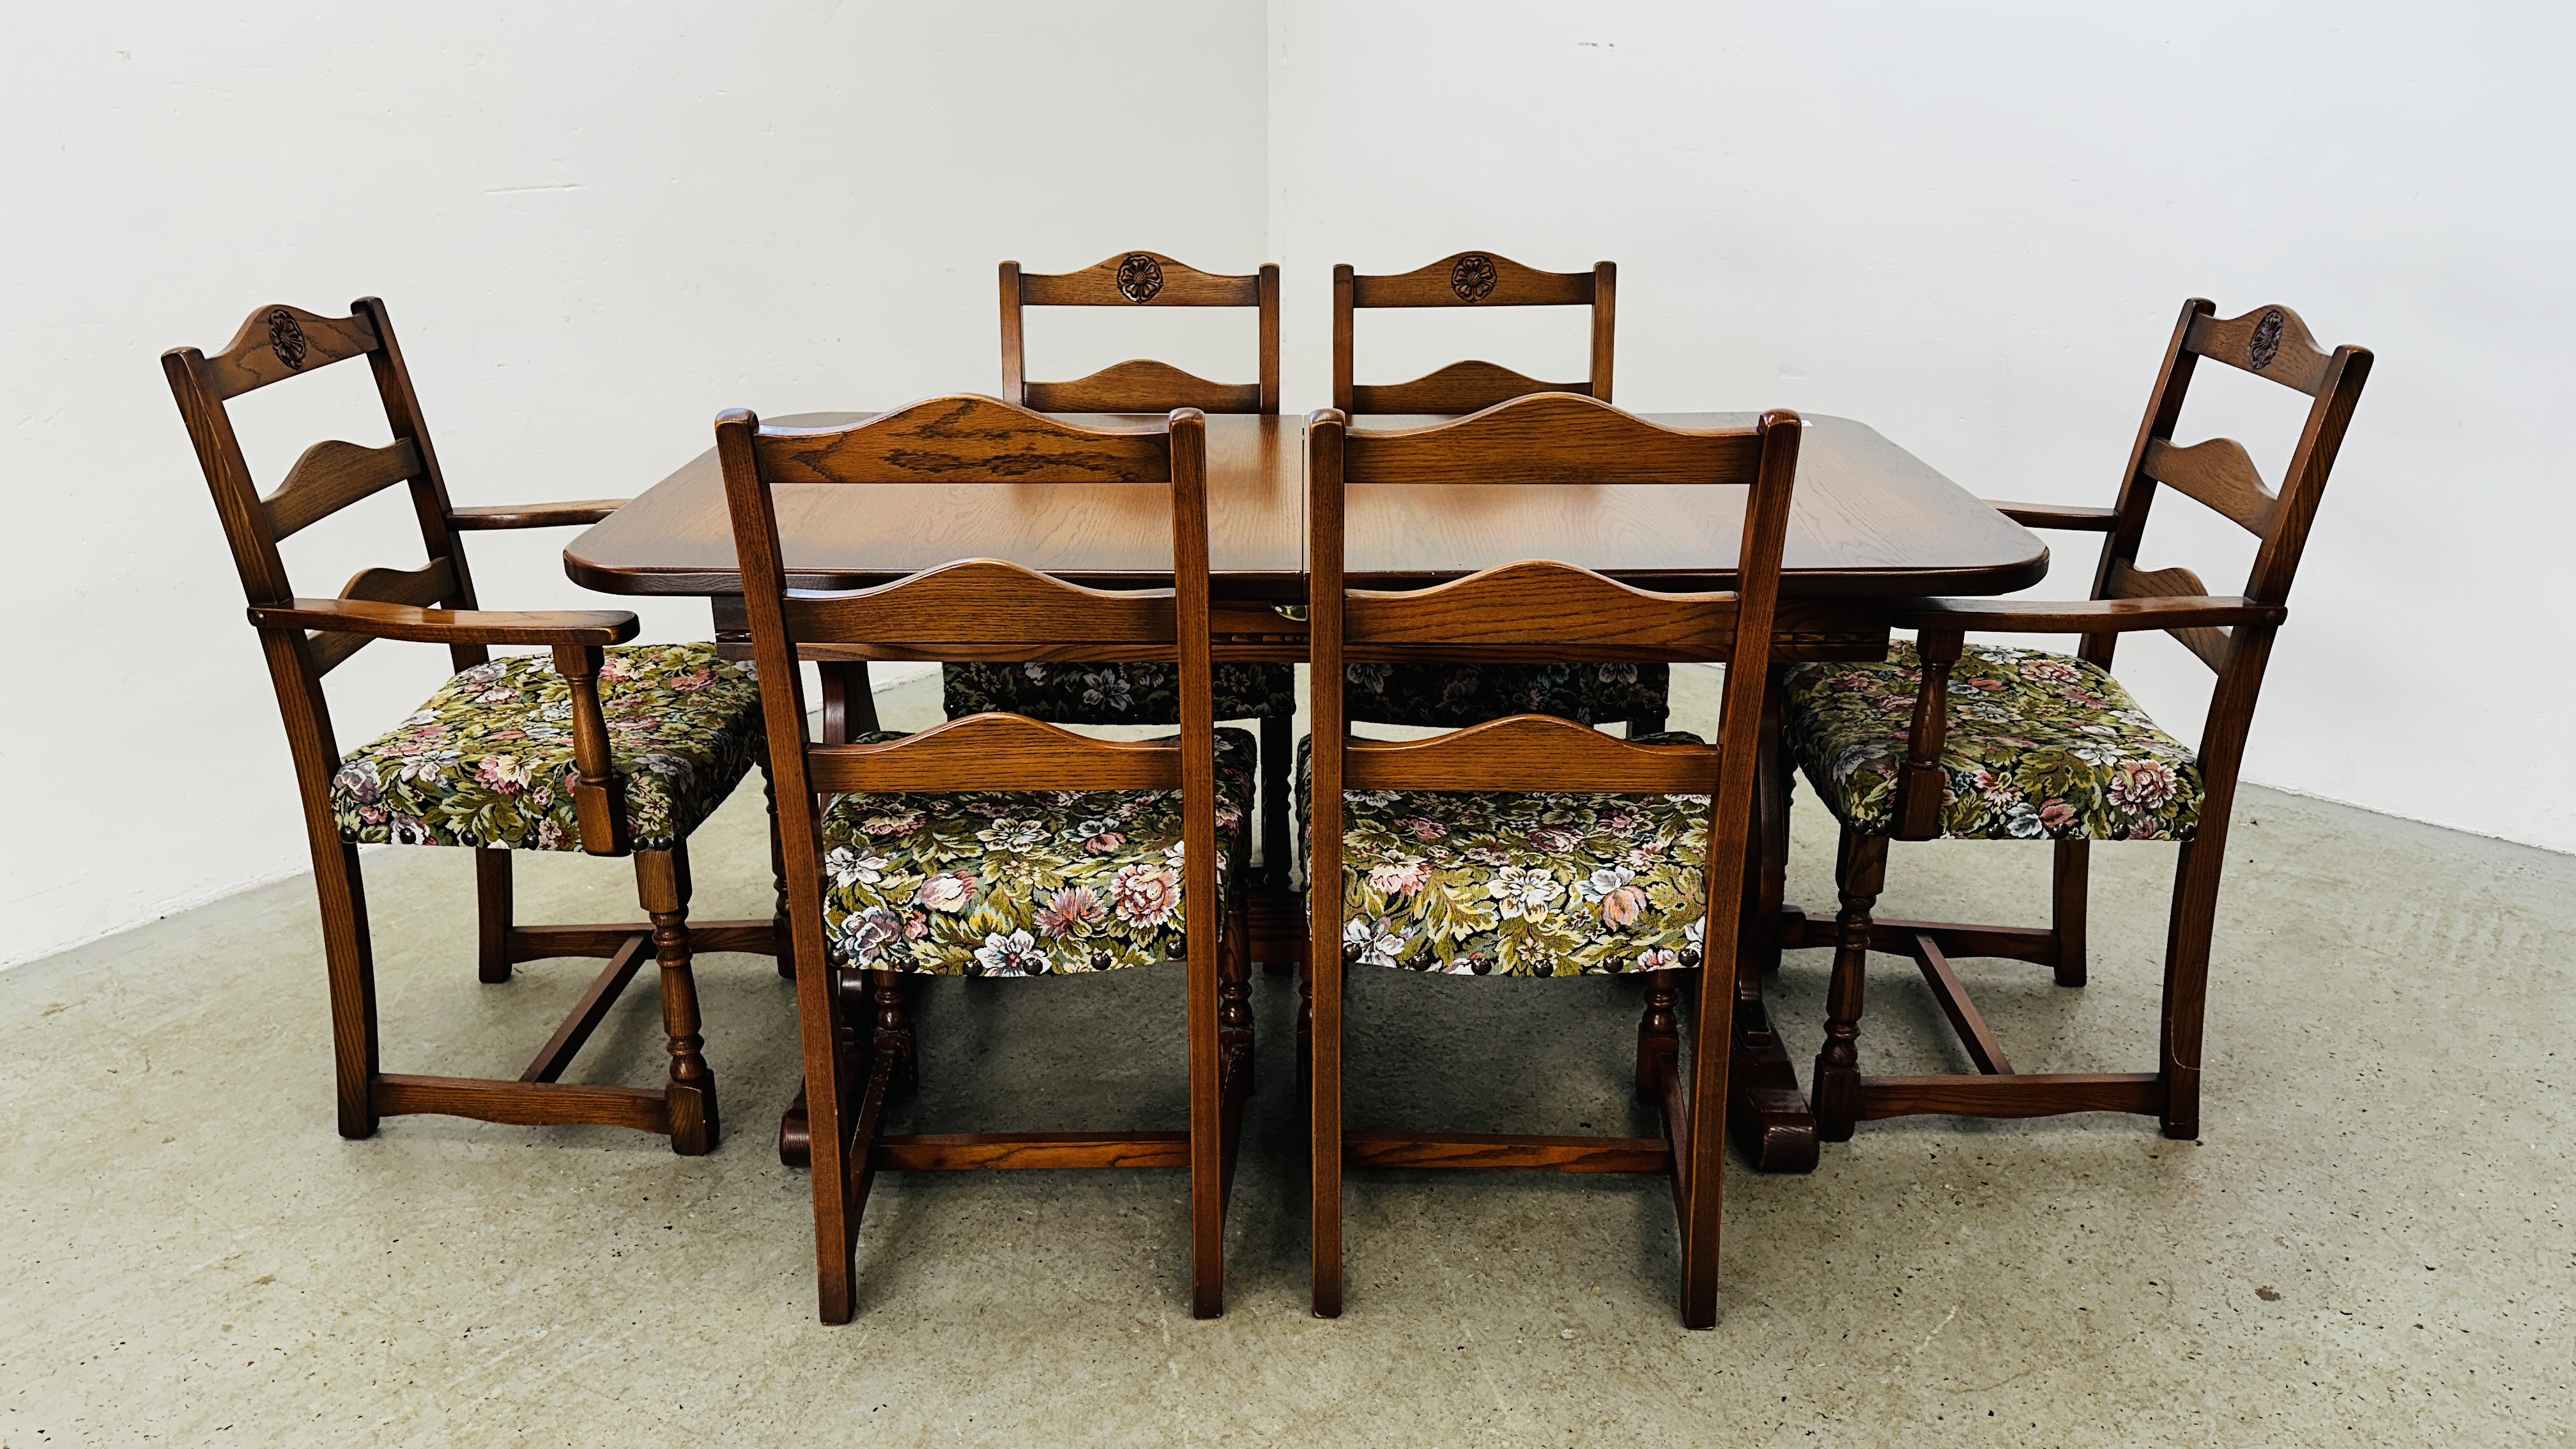 OLD CHARM STYLE EXTENDING DINING TABLE AND SET OF SIX DINING CHAIRS - TABLE 153CM X 84CM (199CM